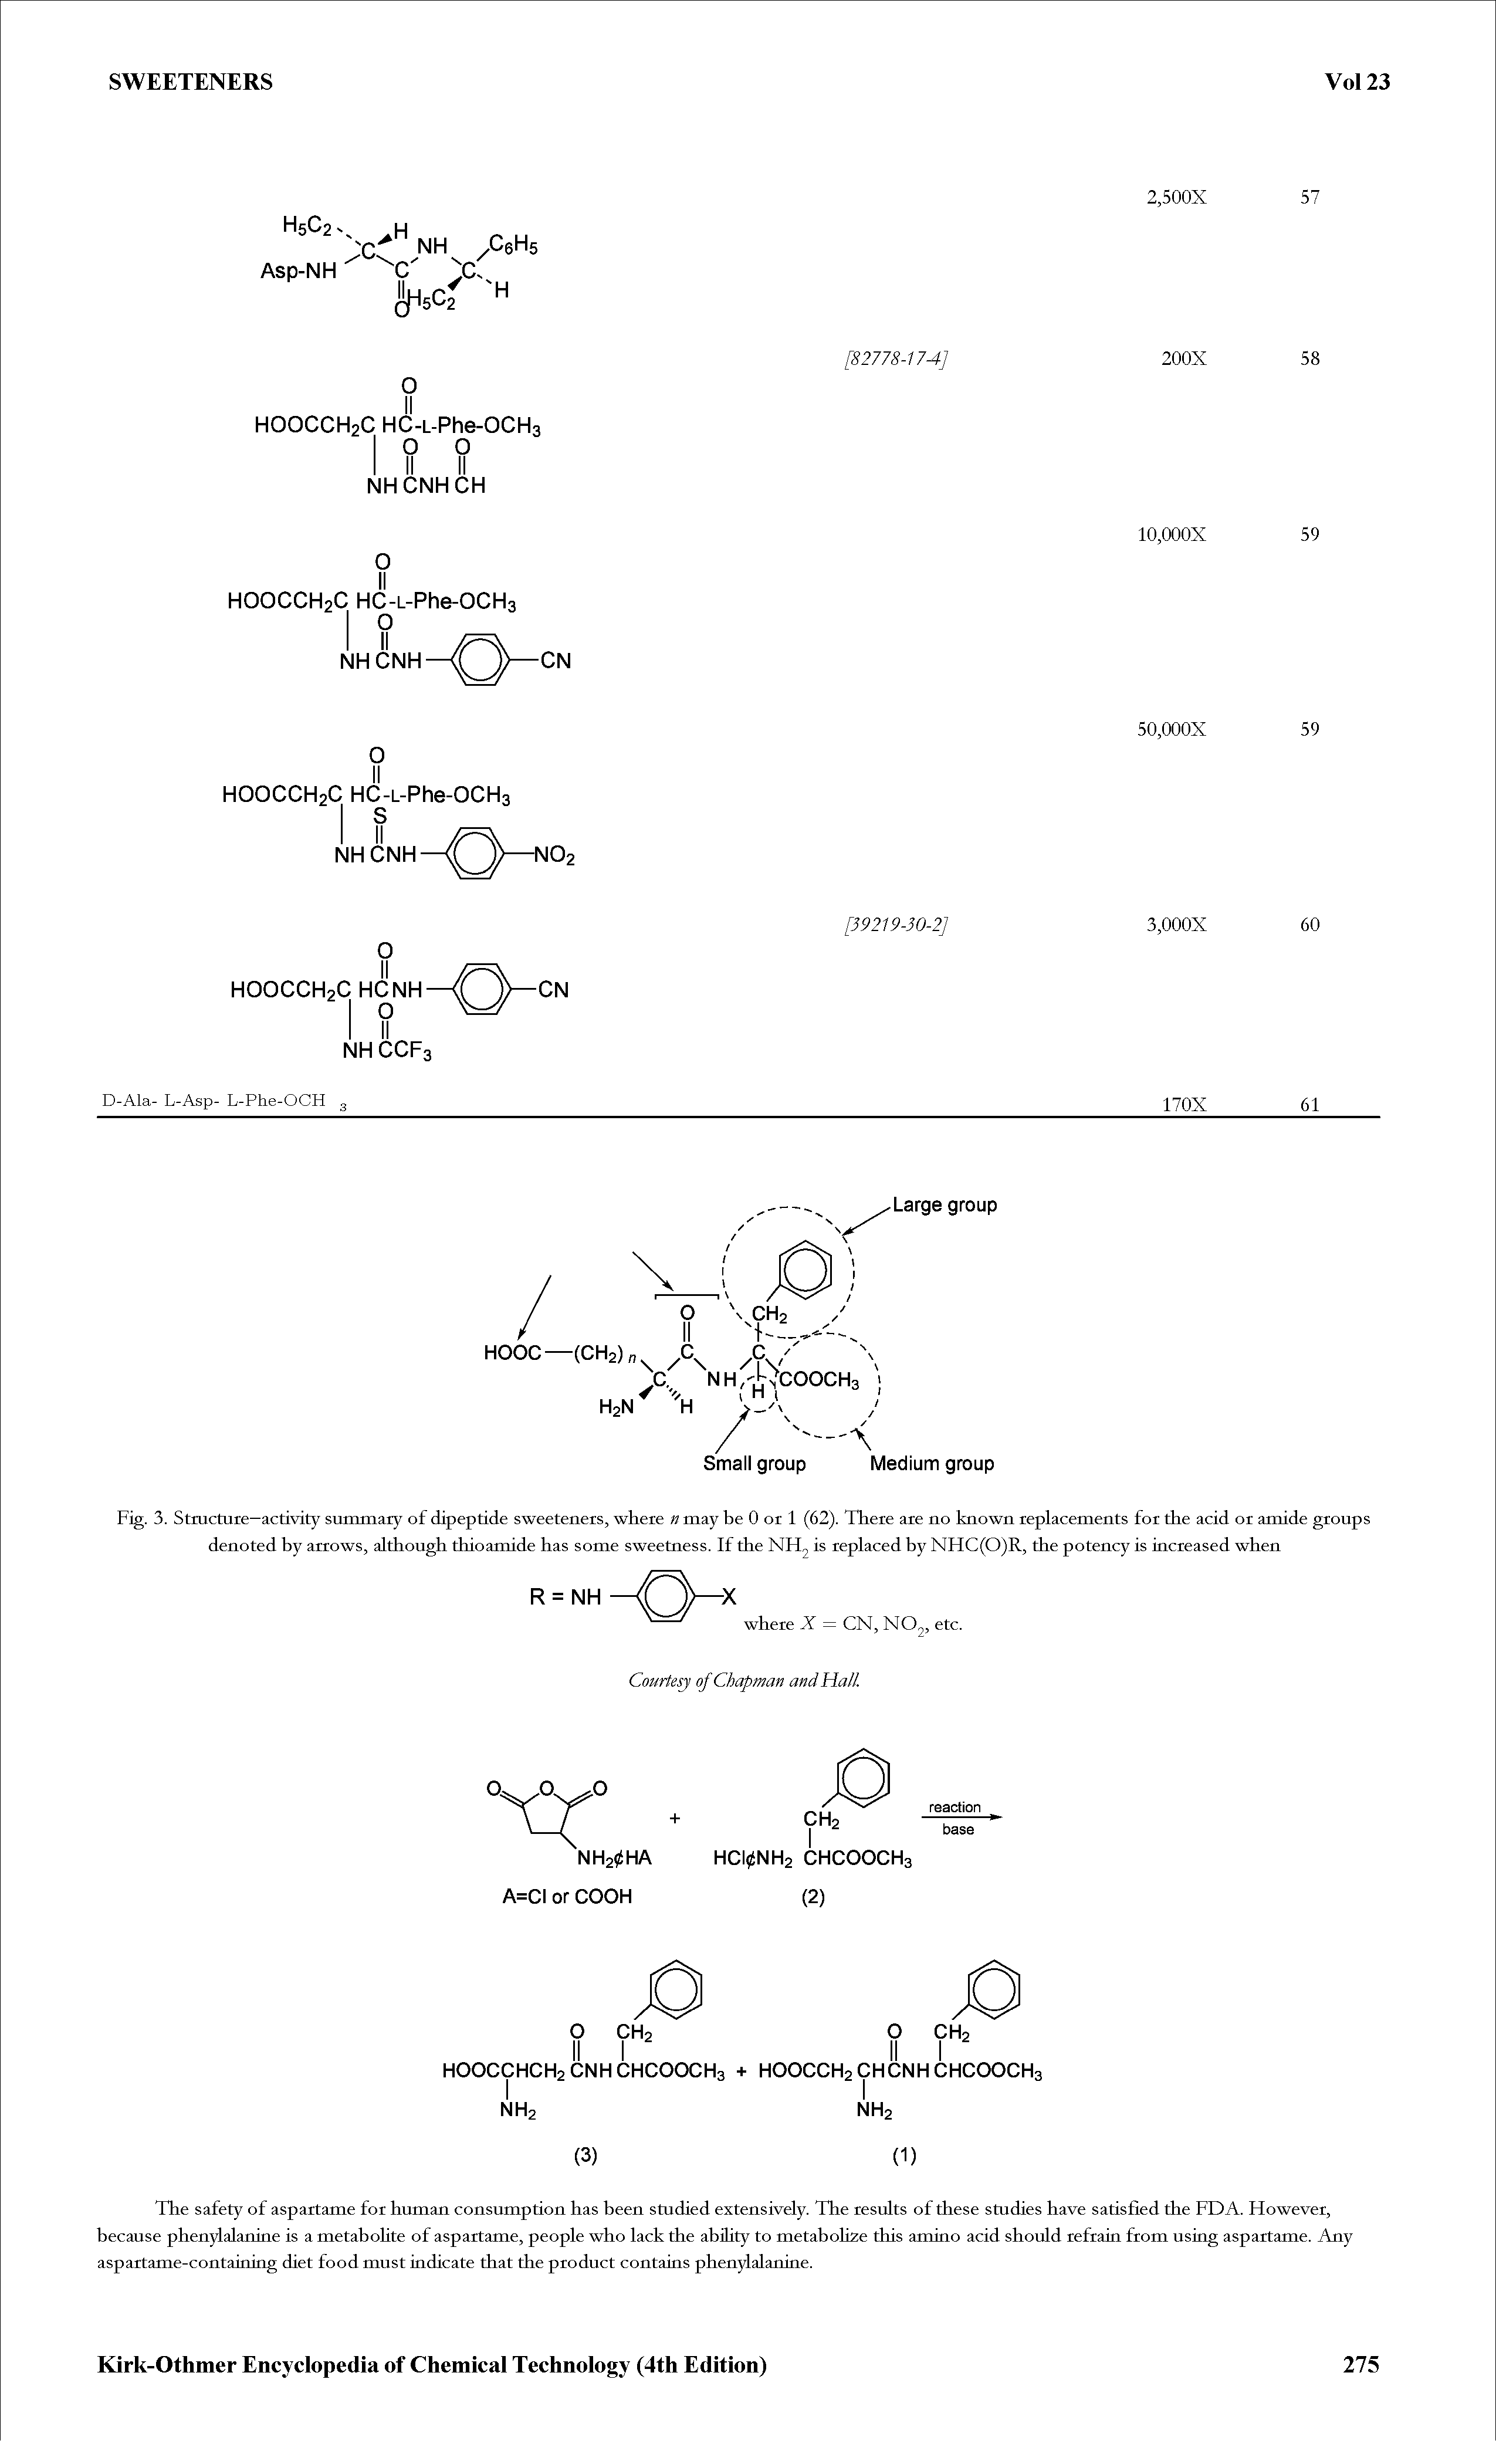 Fig. 3. Structure—activity summary of dipeptide sweeteners, where n may be 0 or 1 (62). There are no known replacements for the acid or amide groups denoted by arrows, although thioamide has some sweetness. If the NH2 is replaced by NHC(0)R, the potency is increased when...